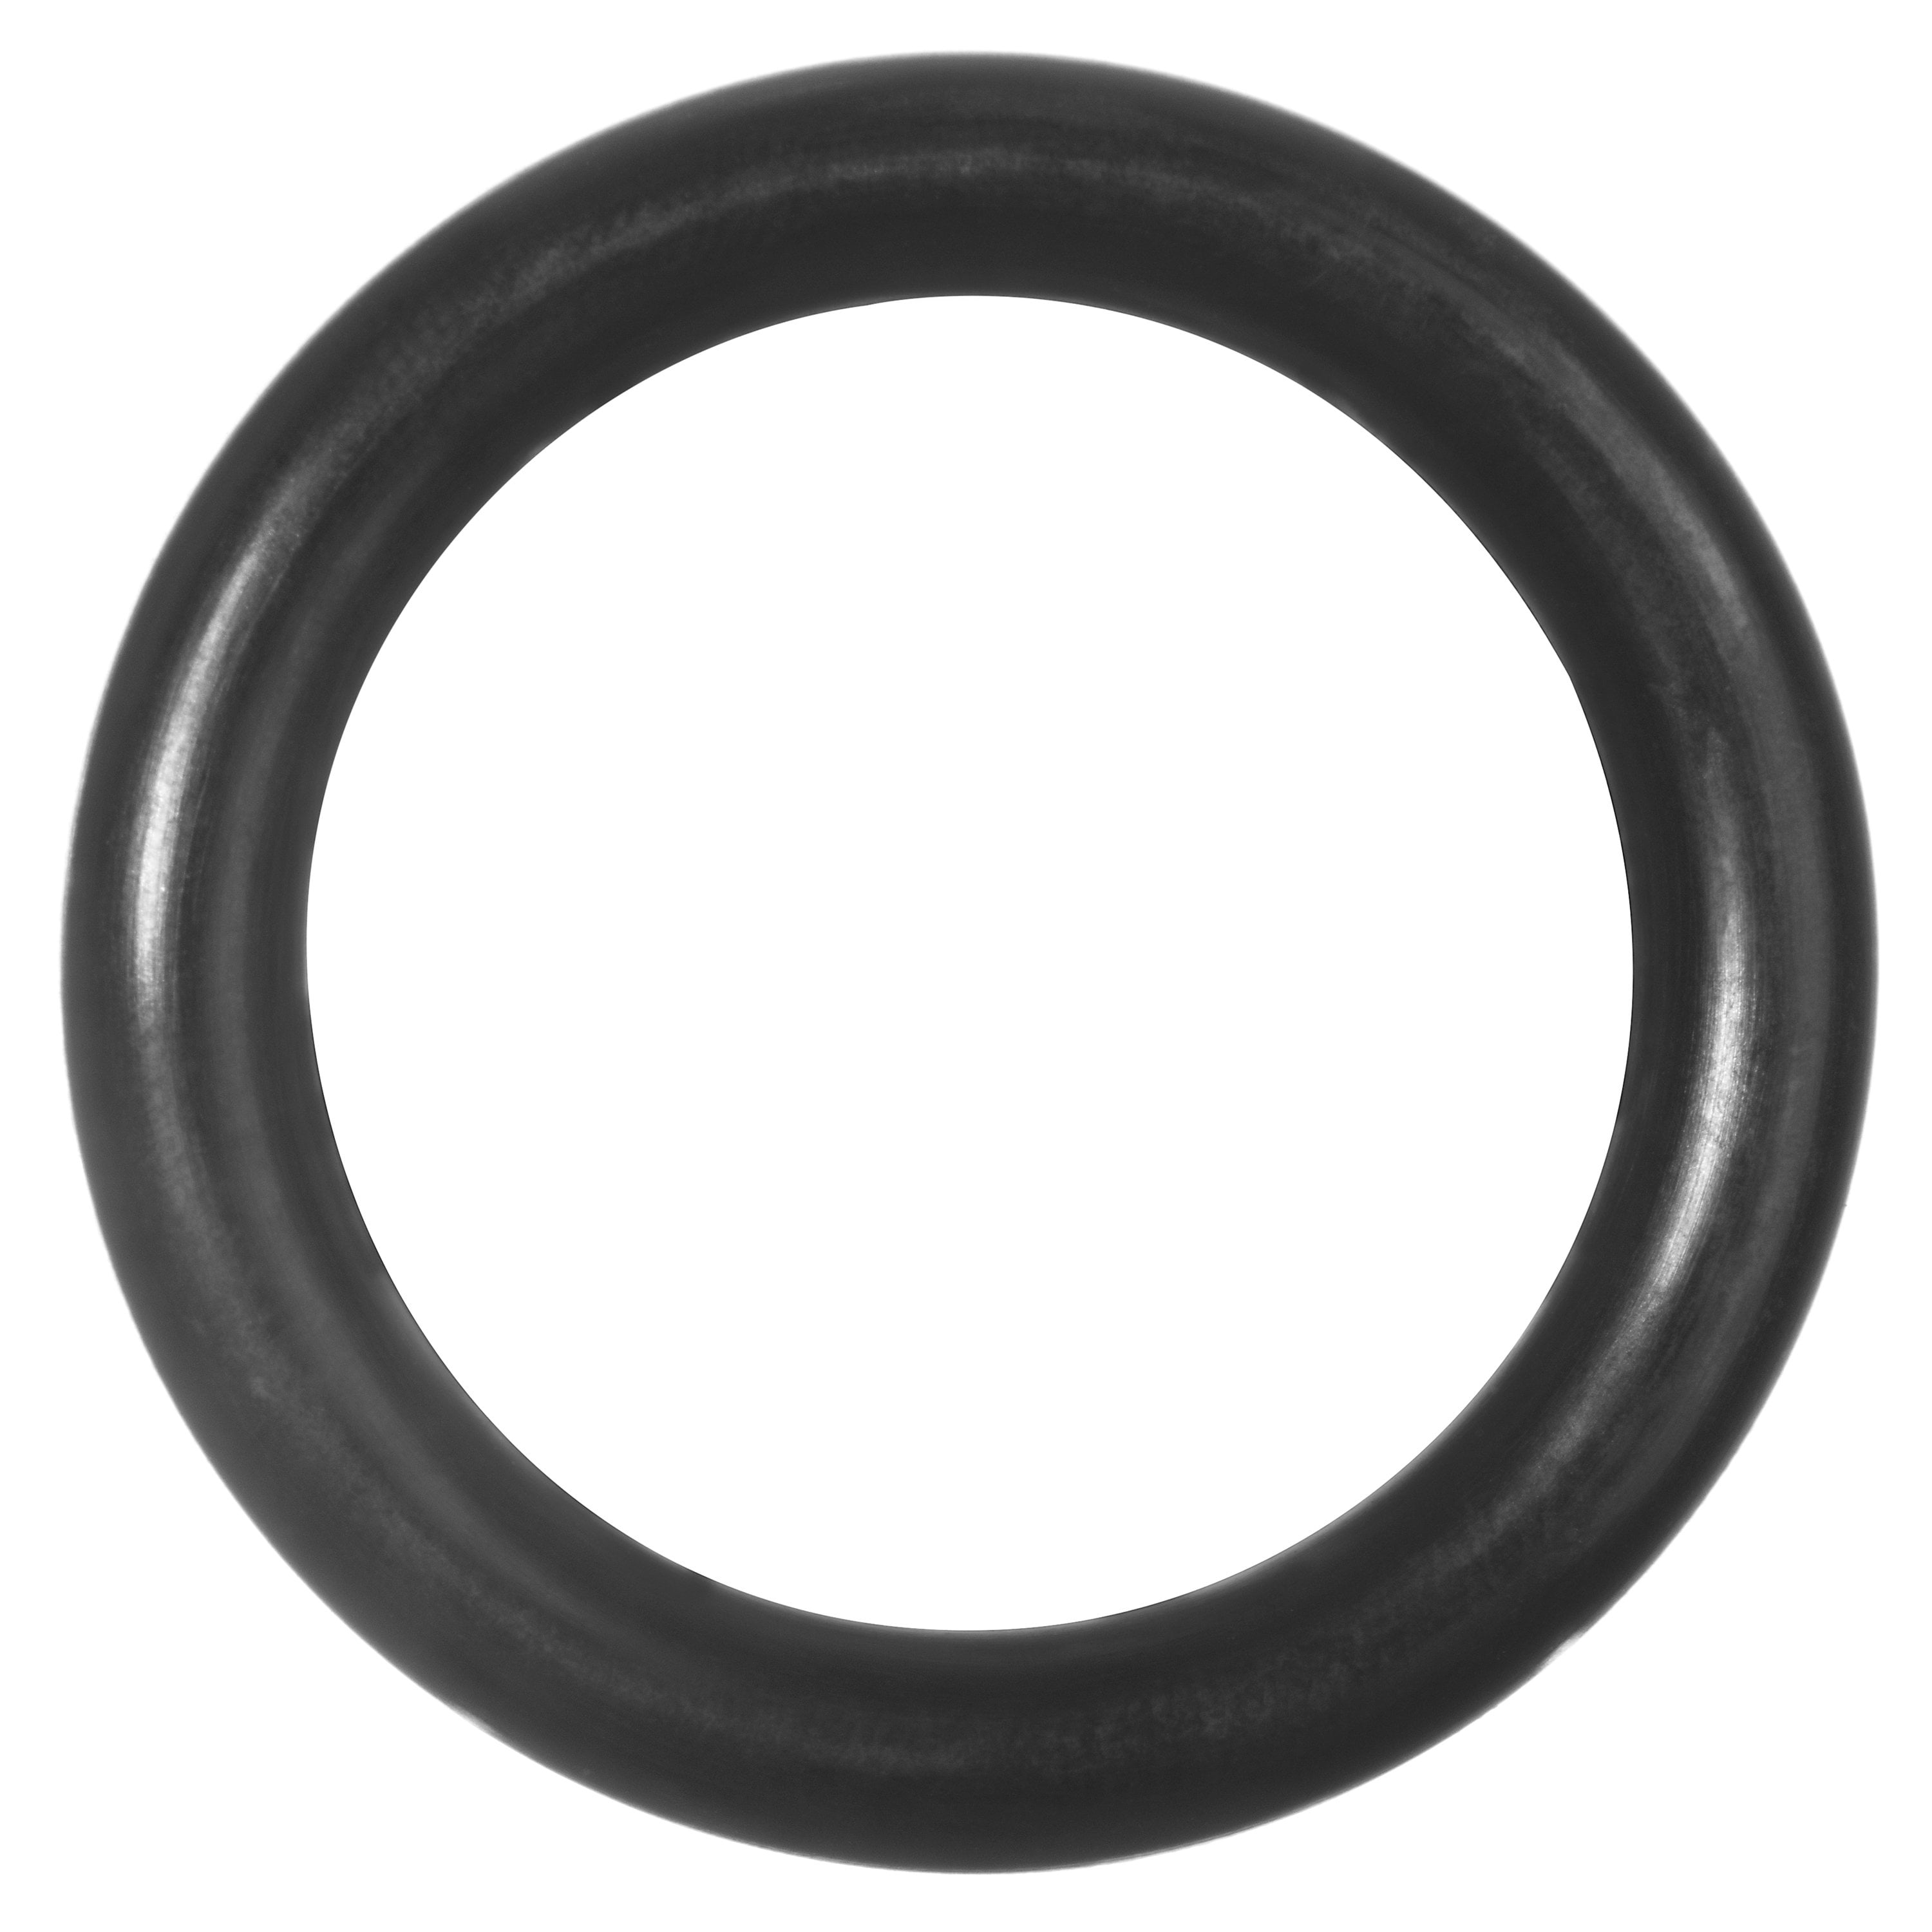 USA Sealing Inc Buna-N O-Ring-3.5mm Wide 25mm ID-Pack of 25